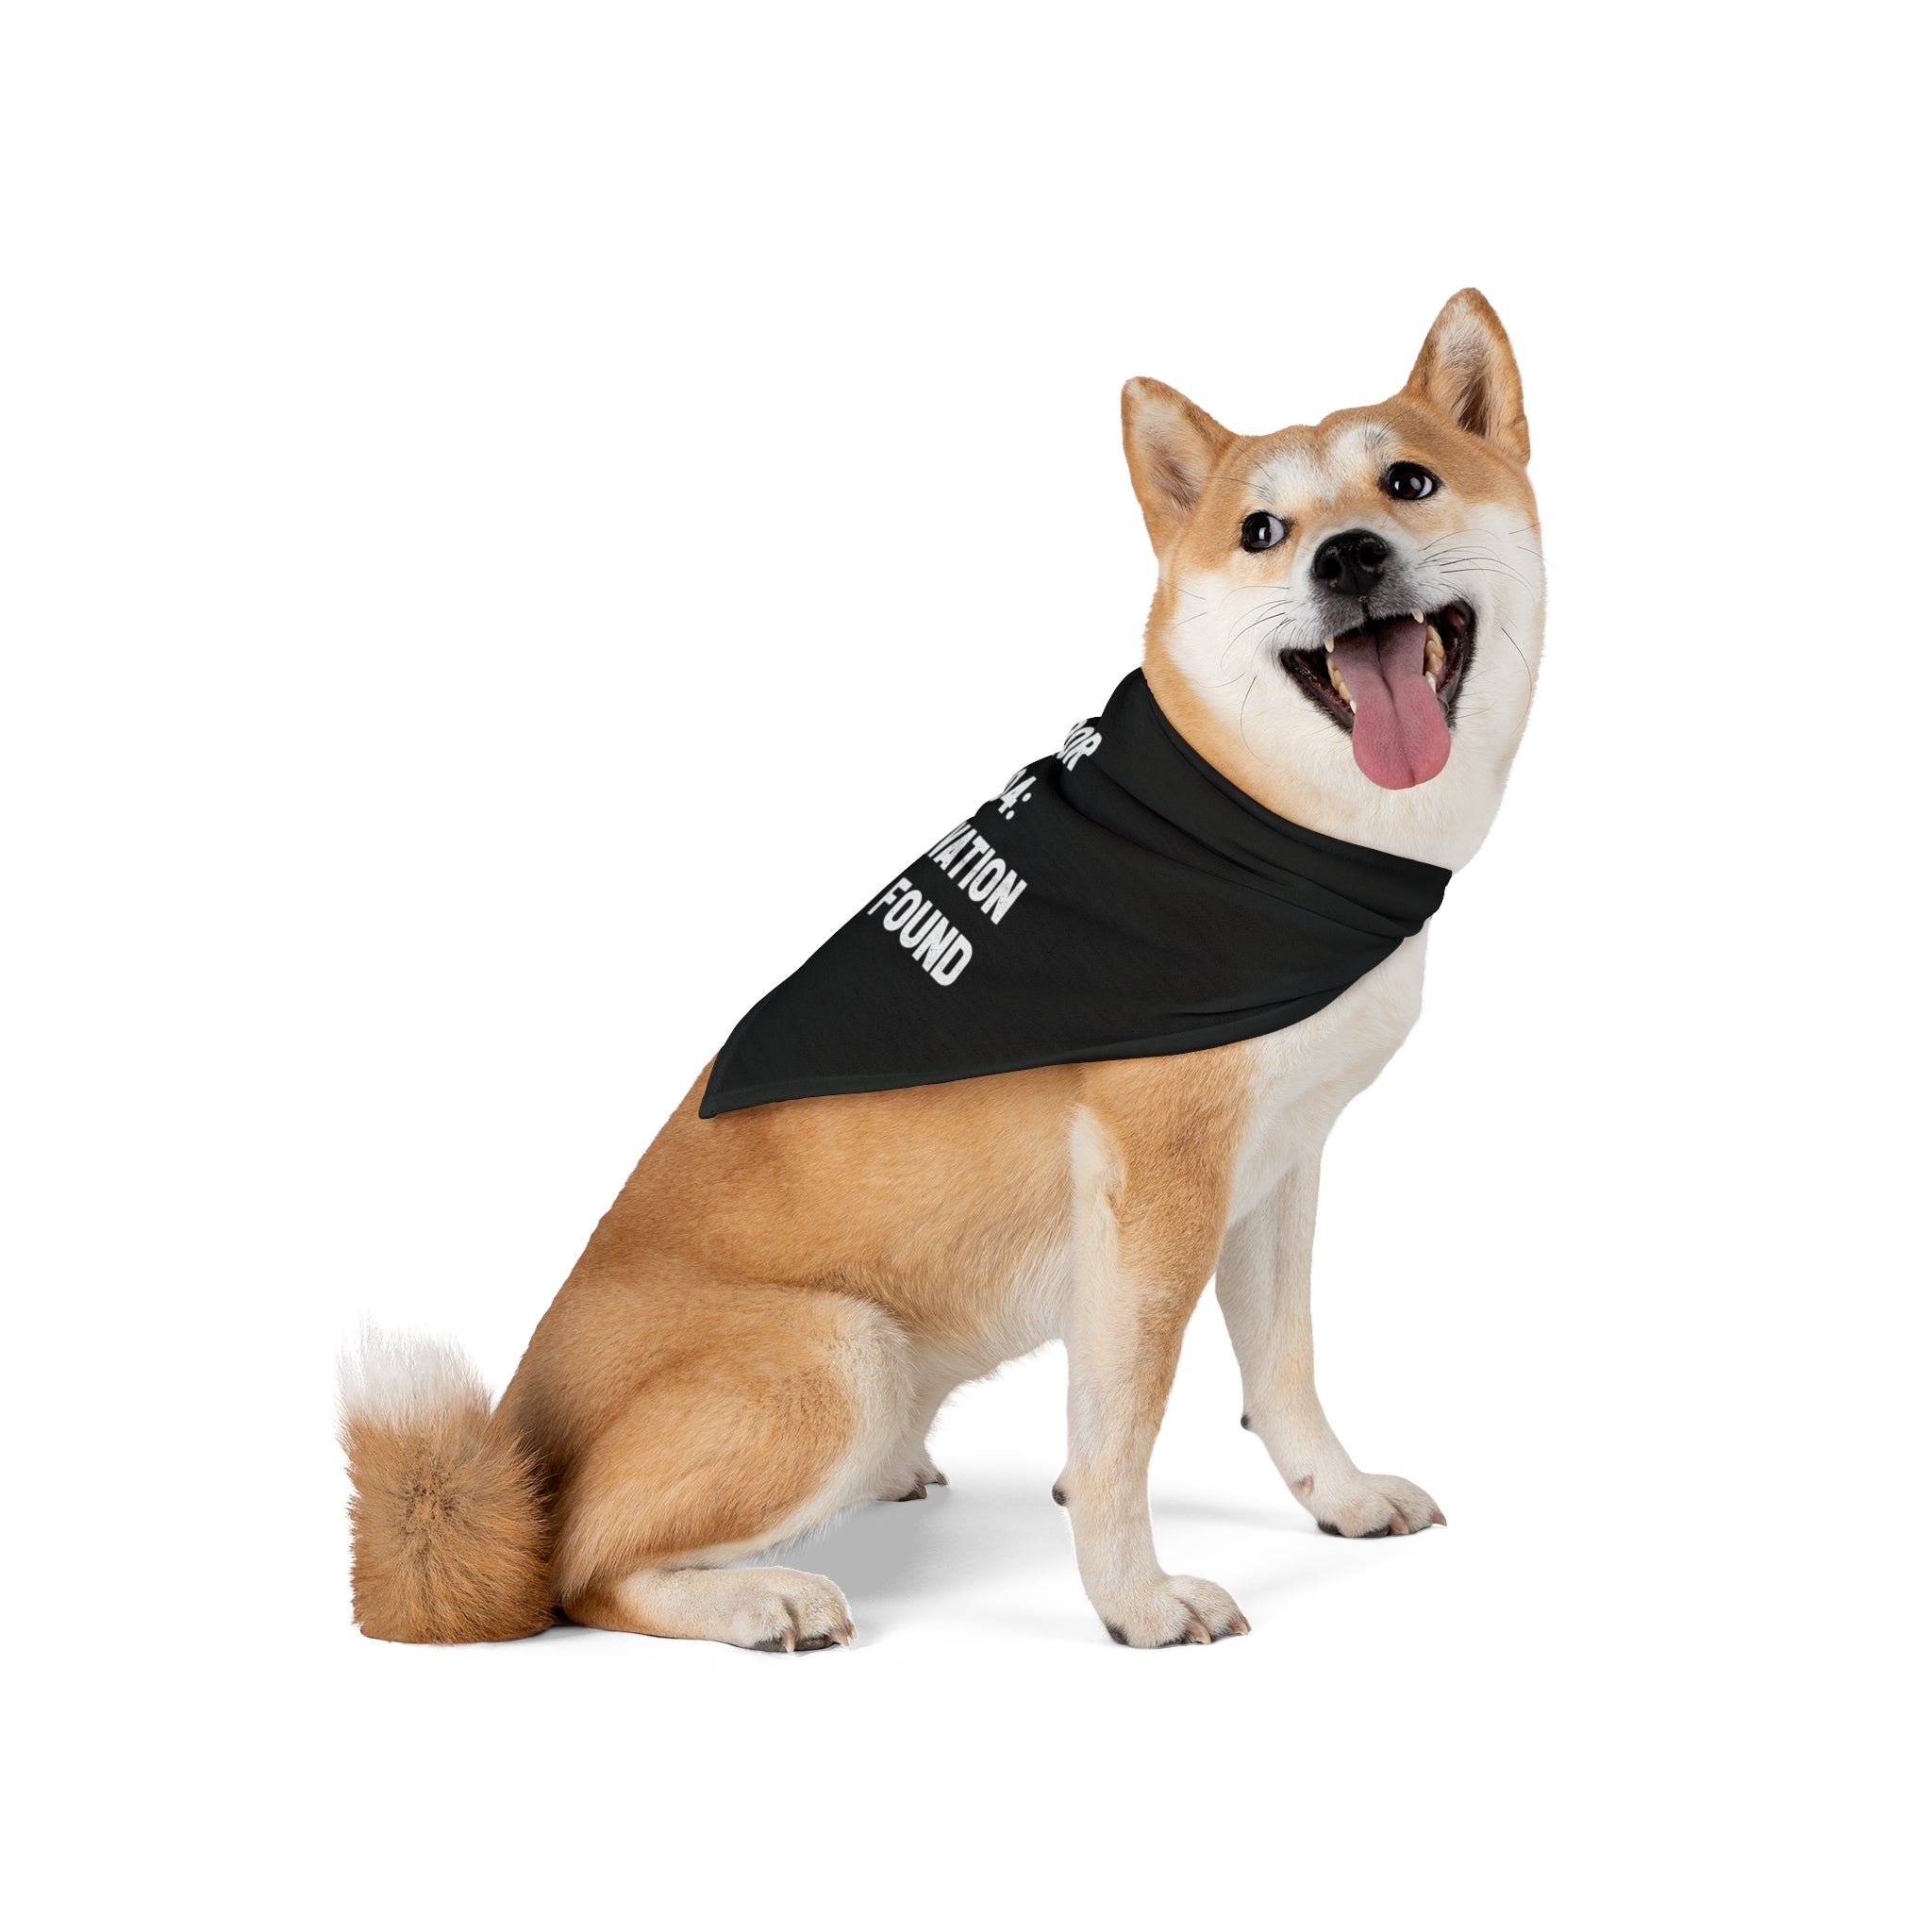 A Shiba Inu dog wearing an Error 404: Motivation not found - Pet Bandana sits against a white background with its tongue out, showcasing the soft-spun polyester material.